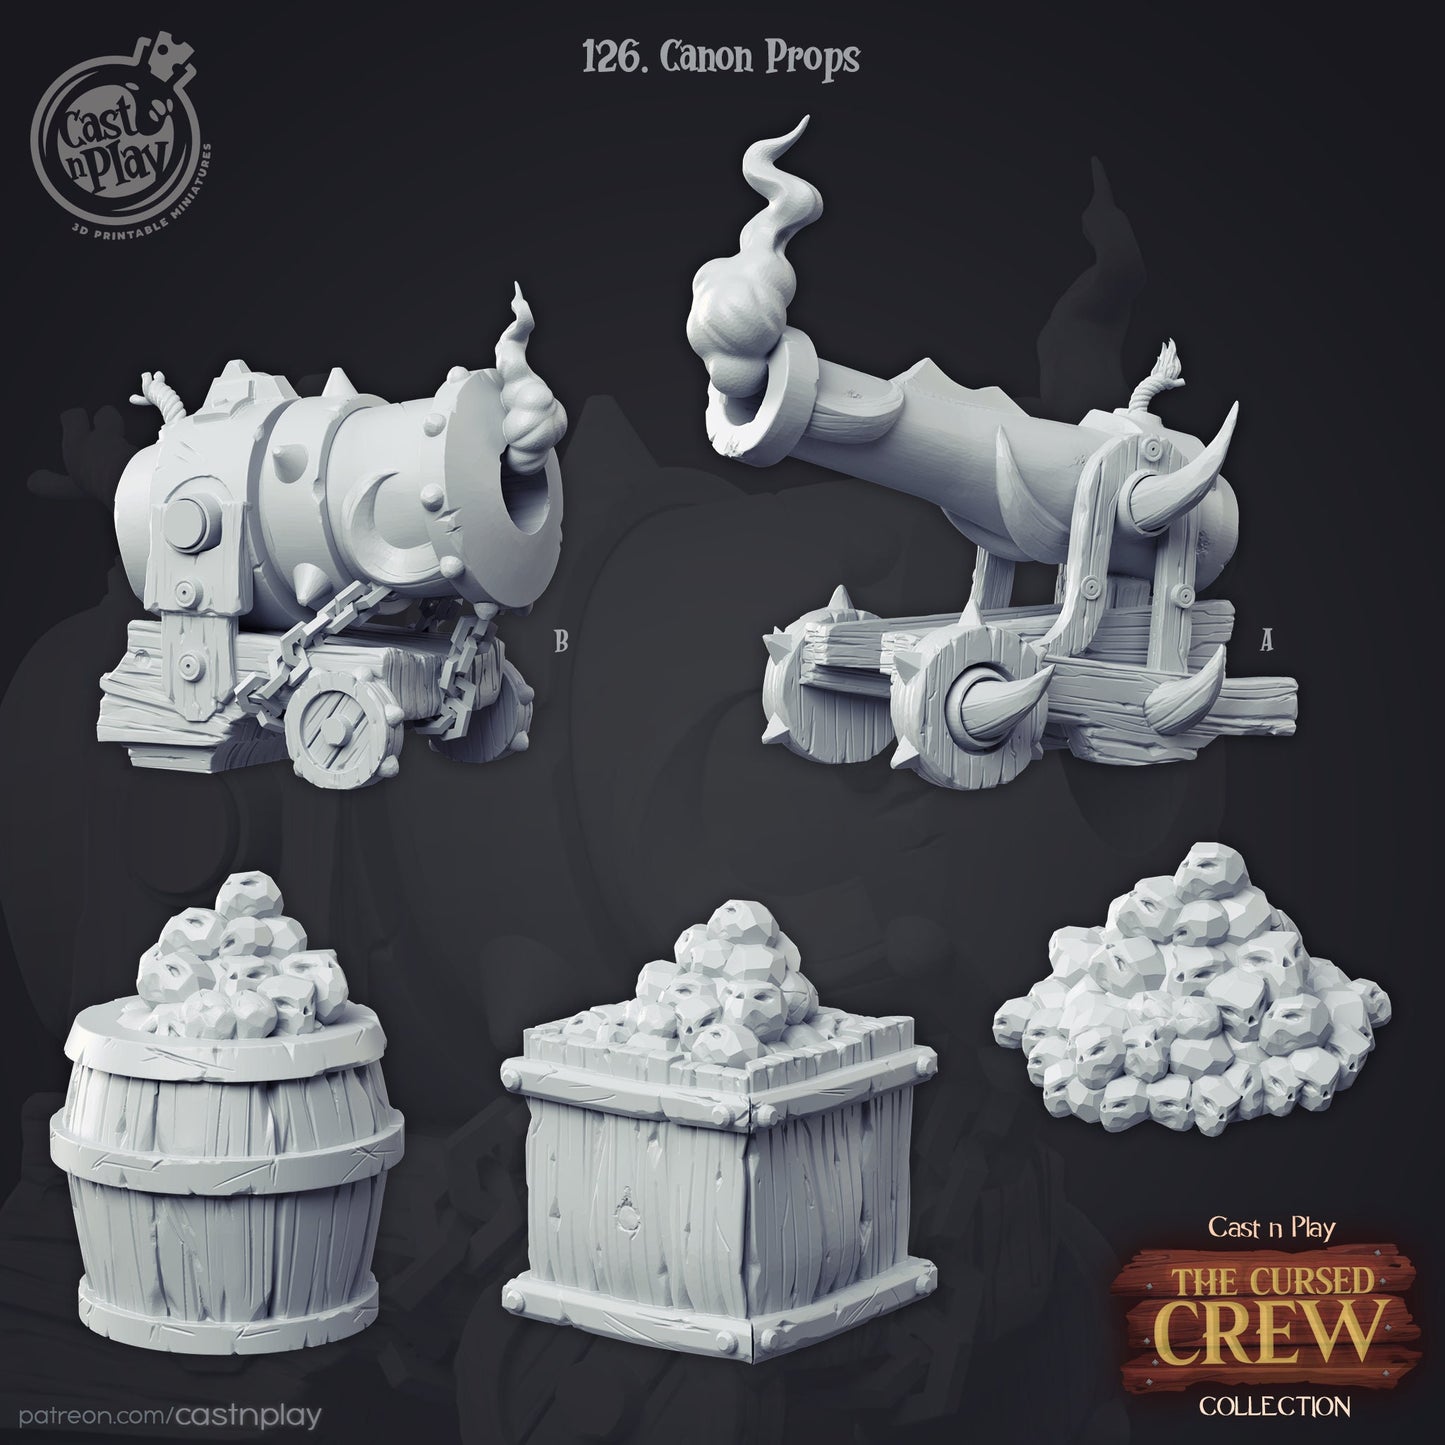 Canon Props, by Cast n Play // 3D Print on Demand / D&D / Pathfinder / RPG